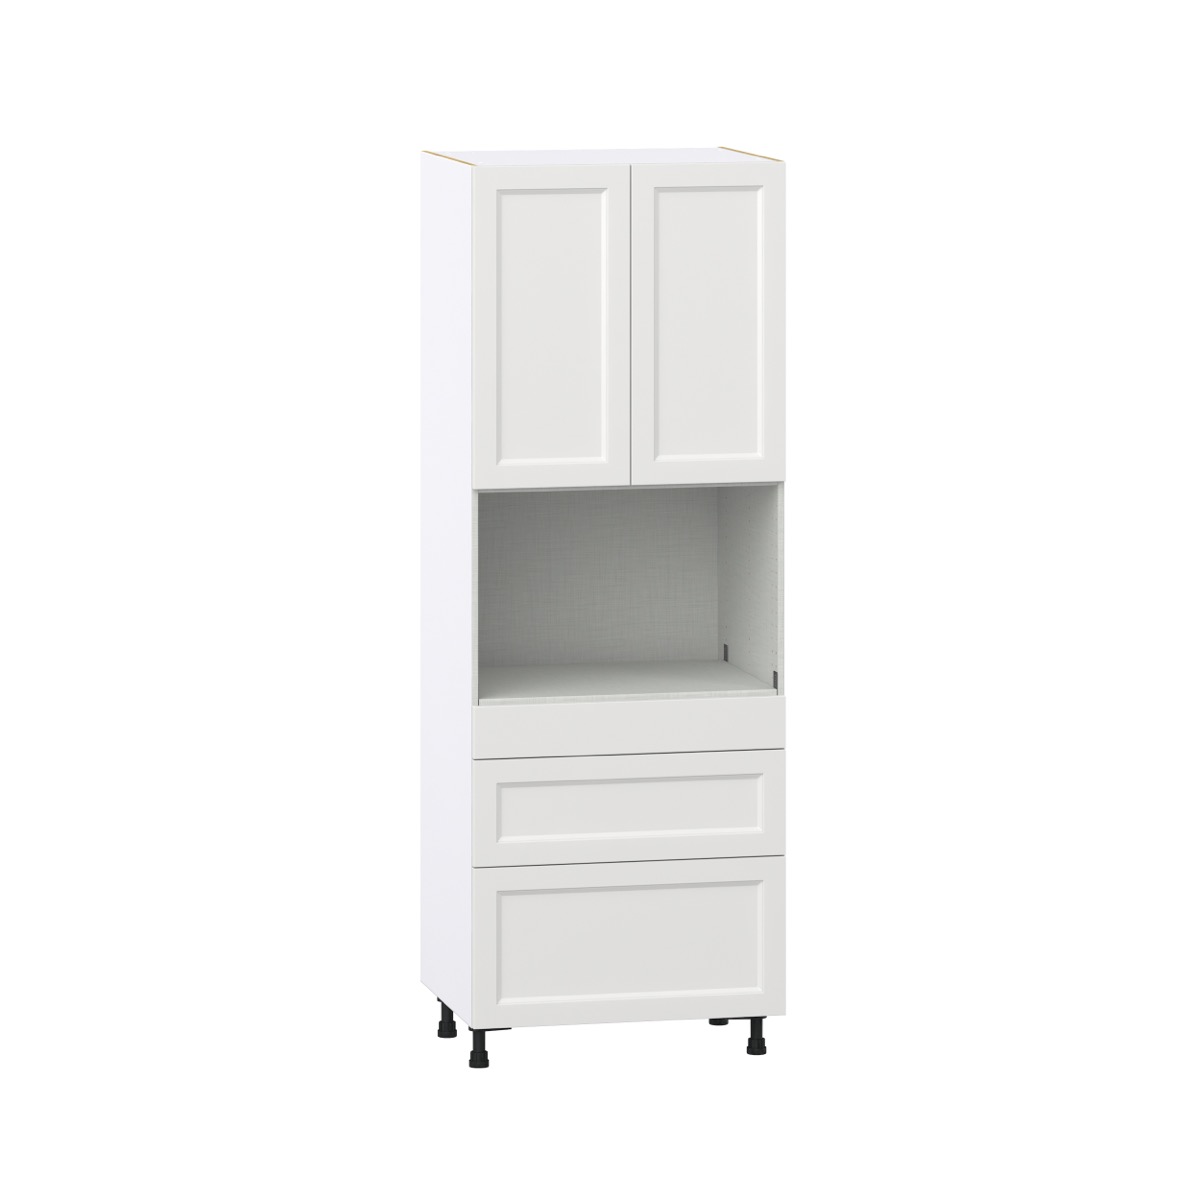 Alton Painted White Shaker Assembled Pantry Micro/Oven Kitchen Cabinet ...